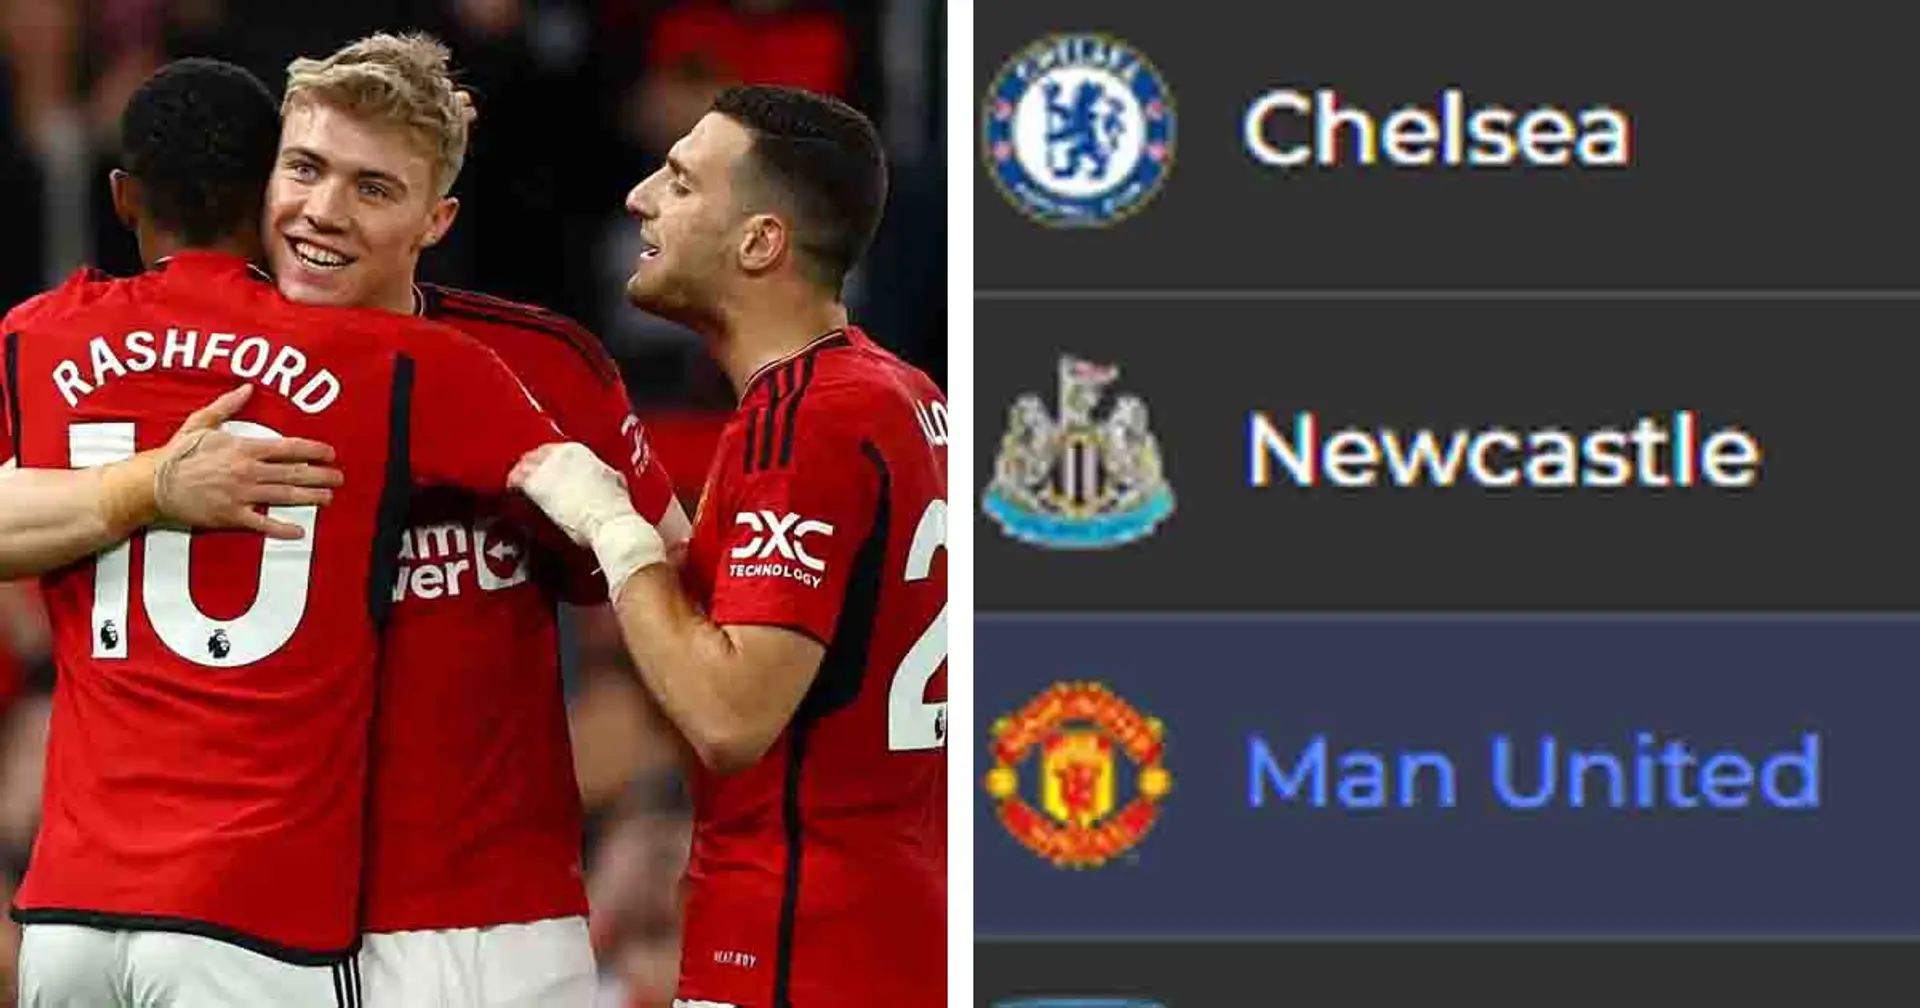 Can Man United achieve top-7 Premier League finish after Newcastle win? Answered